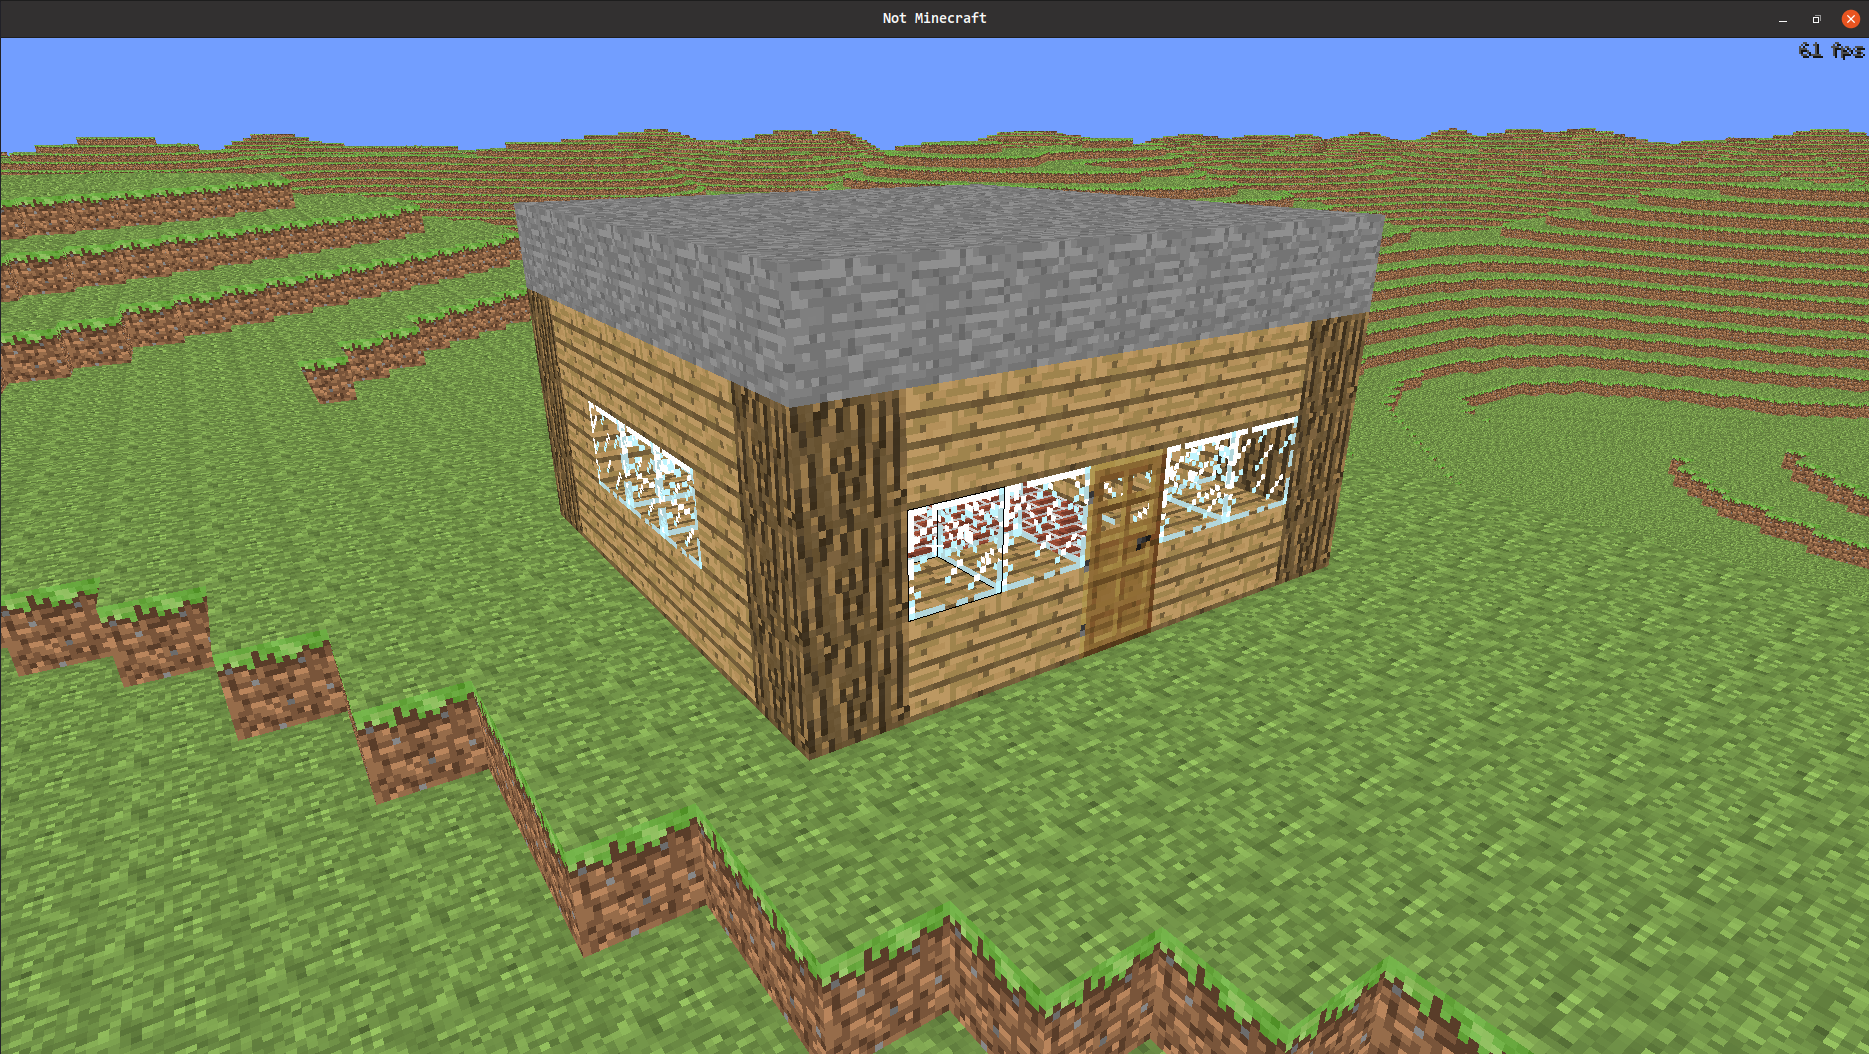 image description: screenshot of aforementioned minecraft-like game. I
have built a house out of various block, including a door.